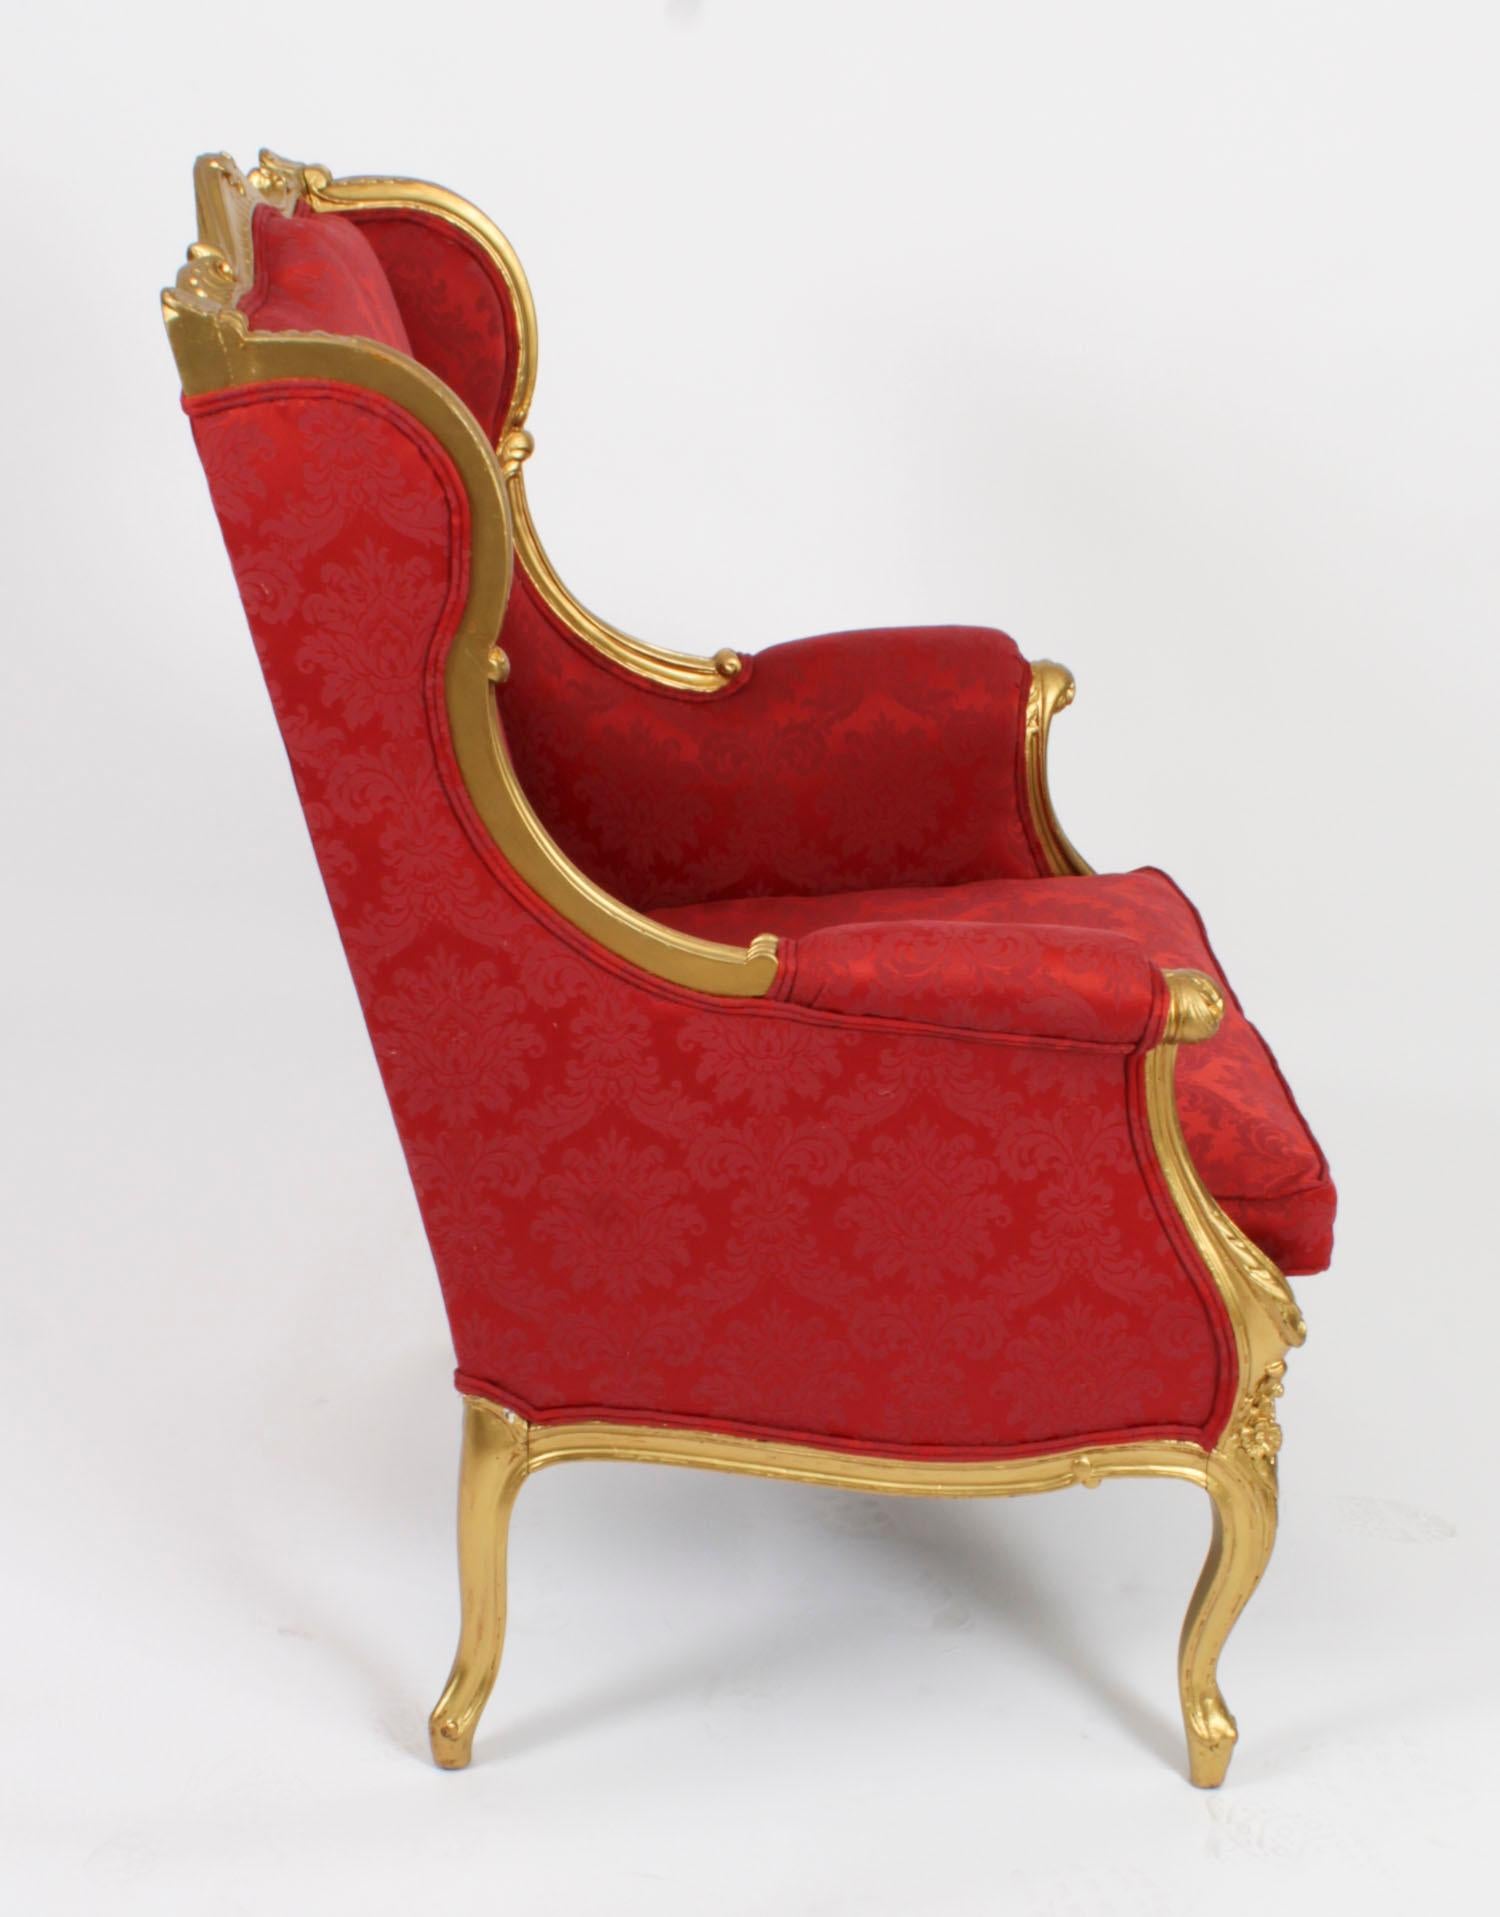 Antique Louis XV Revival Giltwood Shaped Bergere Armchair, 19th Century For Sale 8